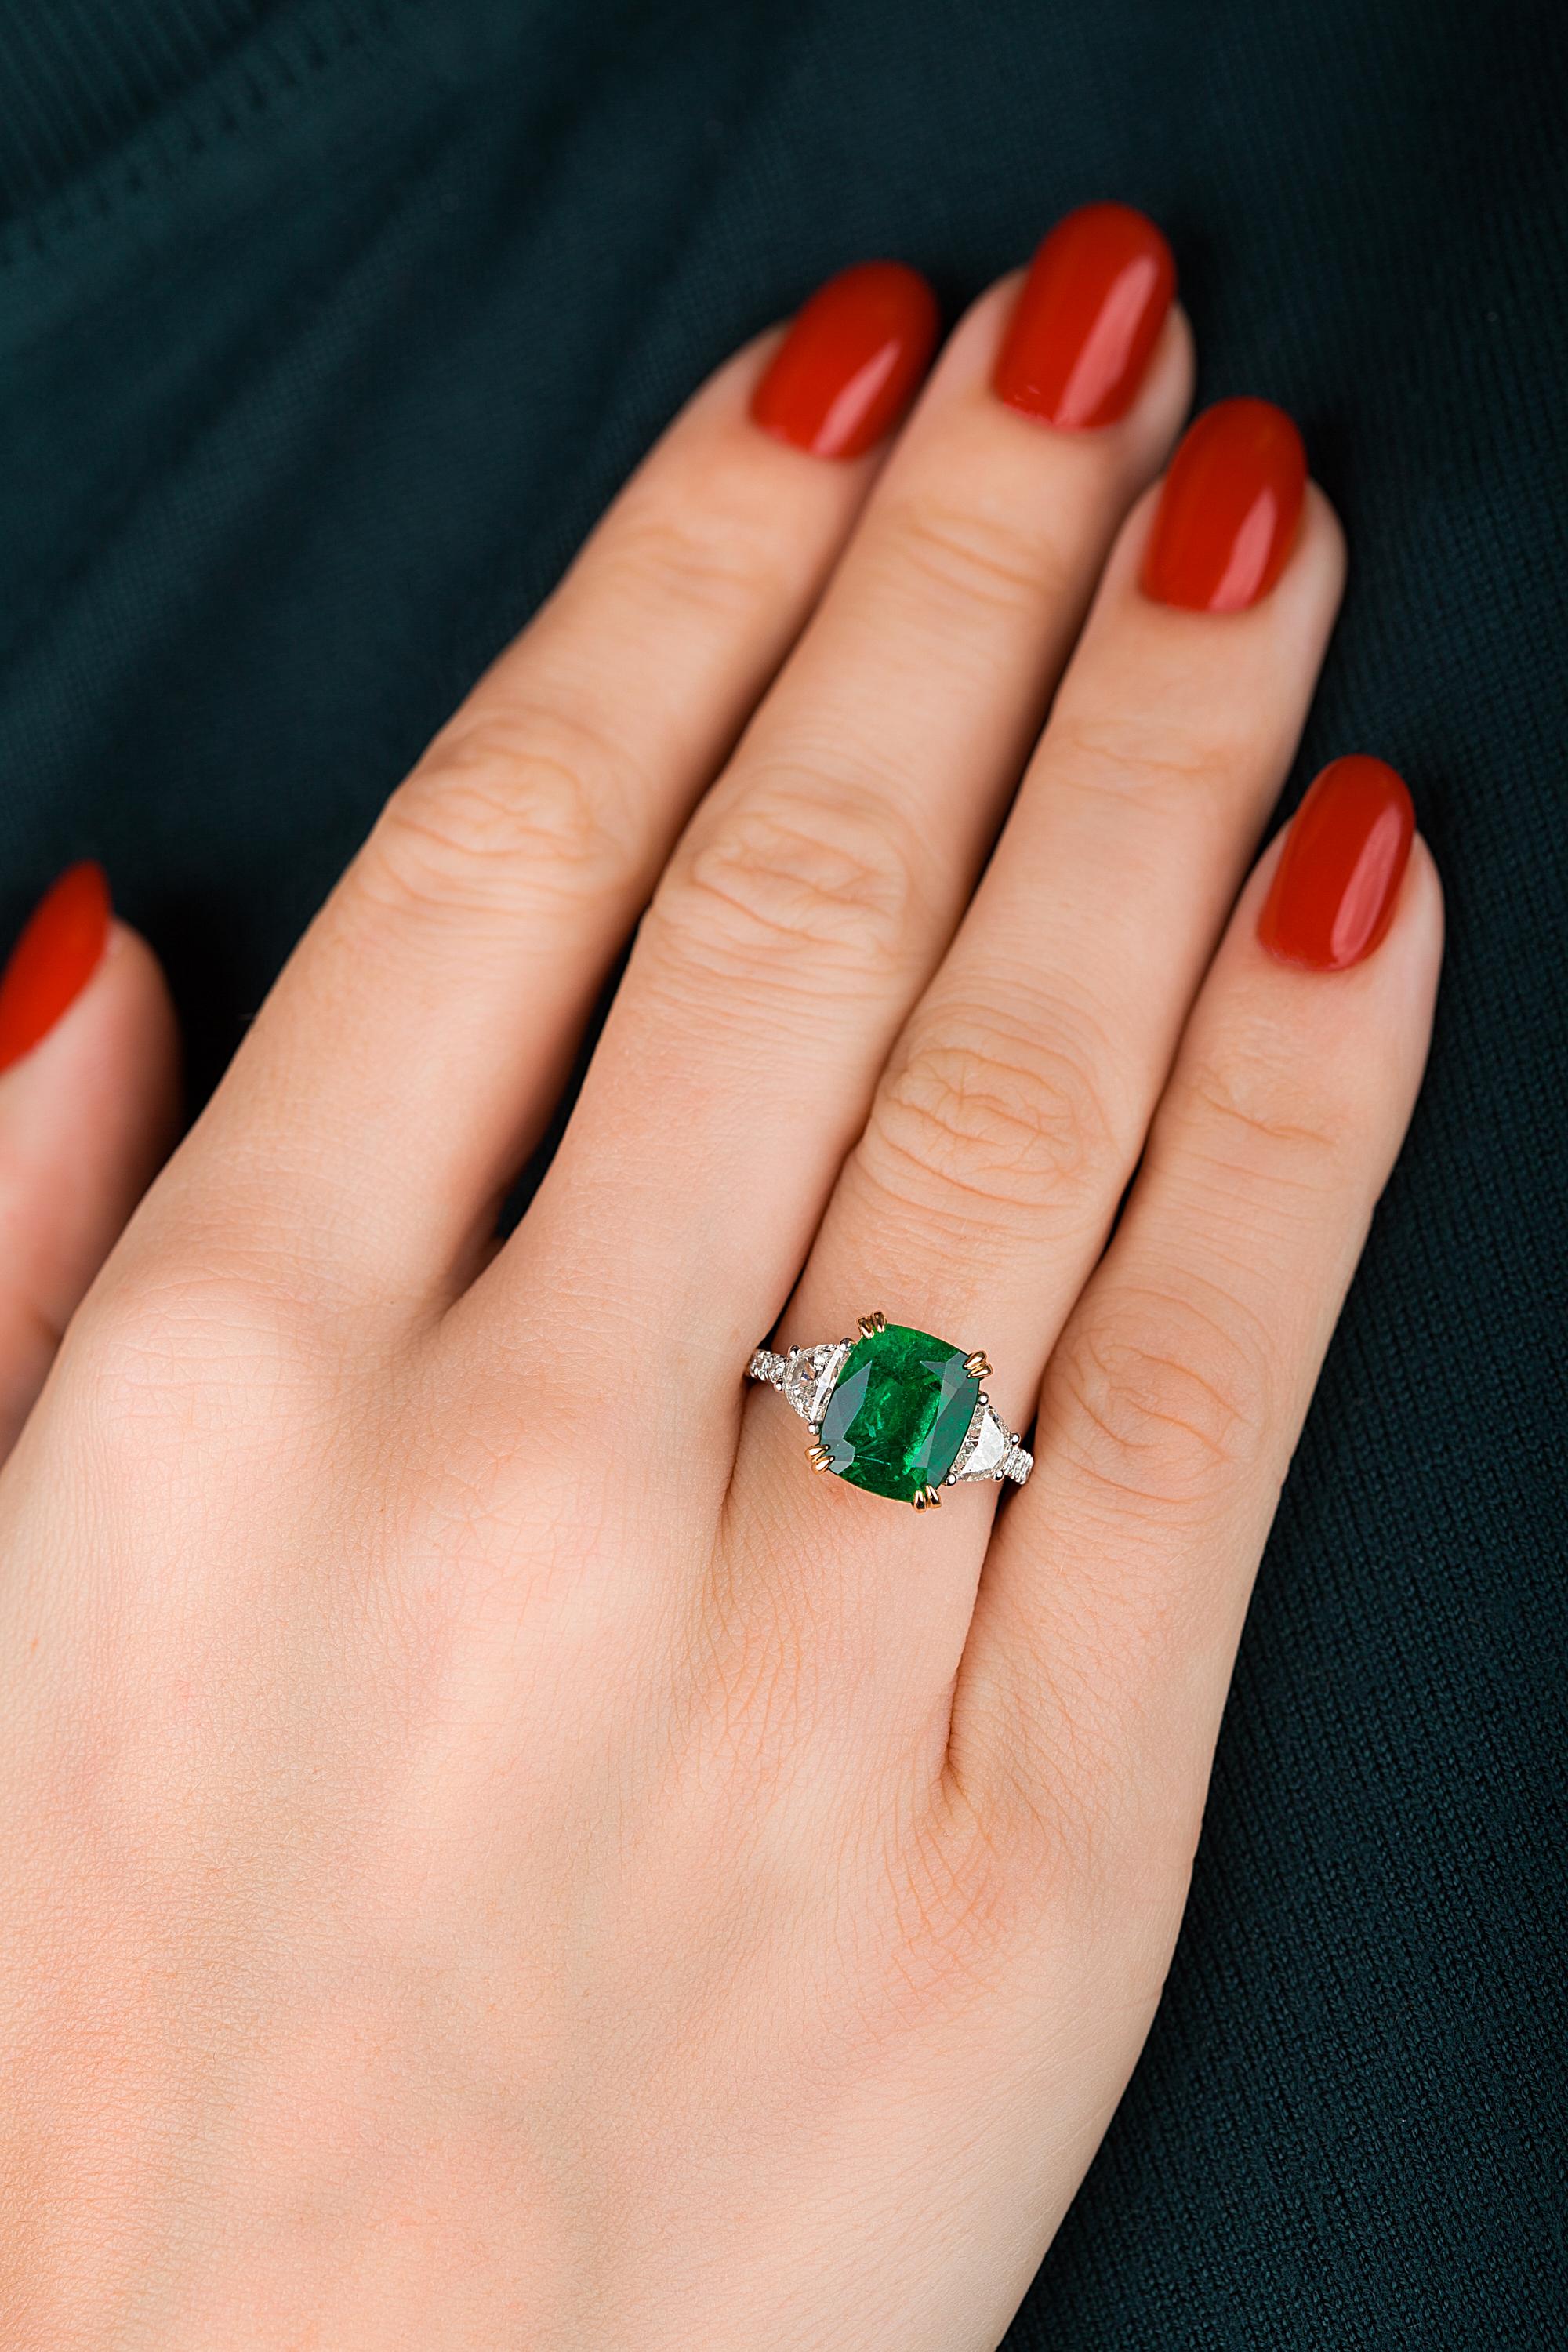 Hand made in the Emilio Jewelry Factory,  Certified Vivid Green Emerald cut Zambian Genuine Emerald 4.22 Carats set in the center. (colombian emeralds are much lighter in color) Based on emerald grading methodology this emerald in our opinion is a